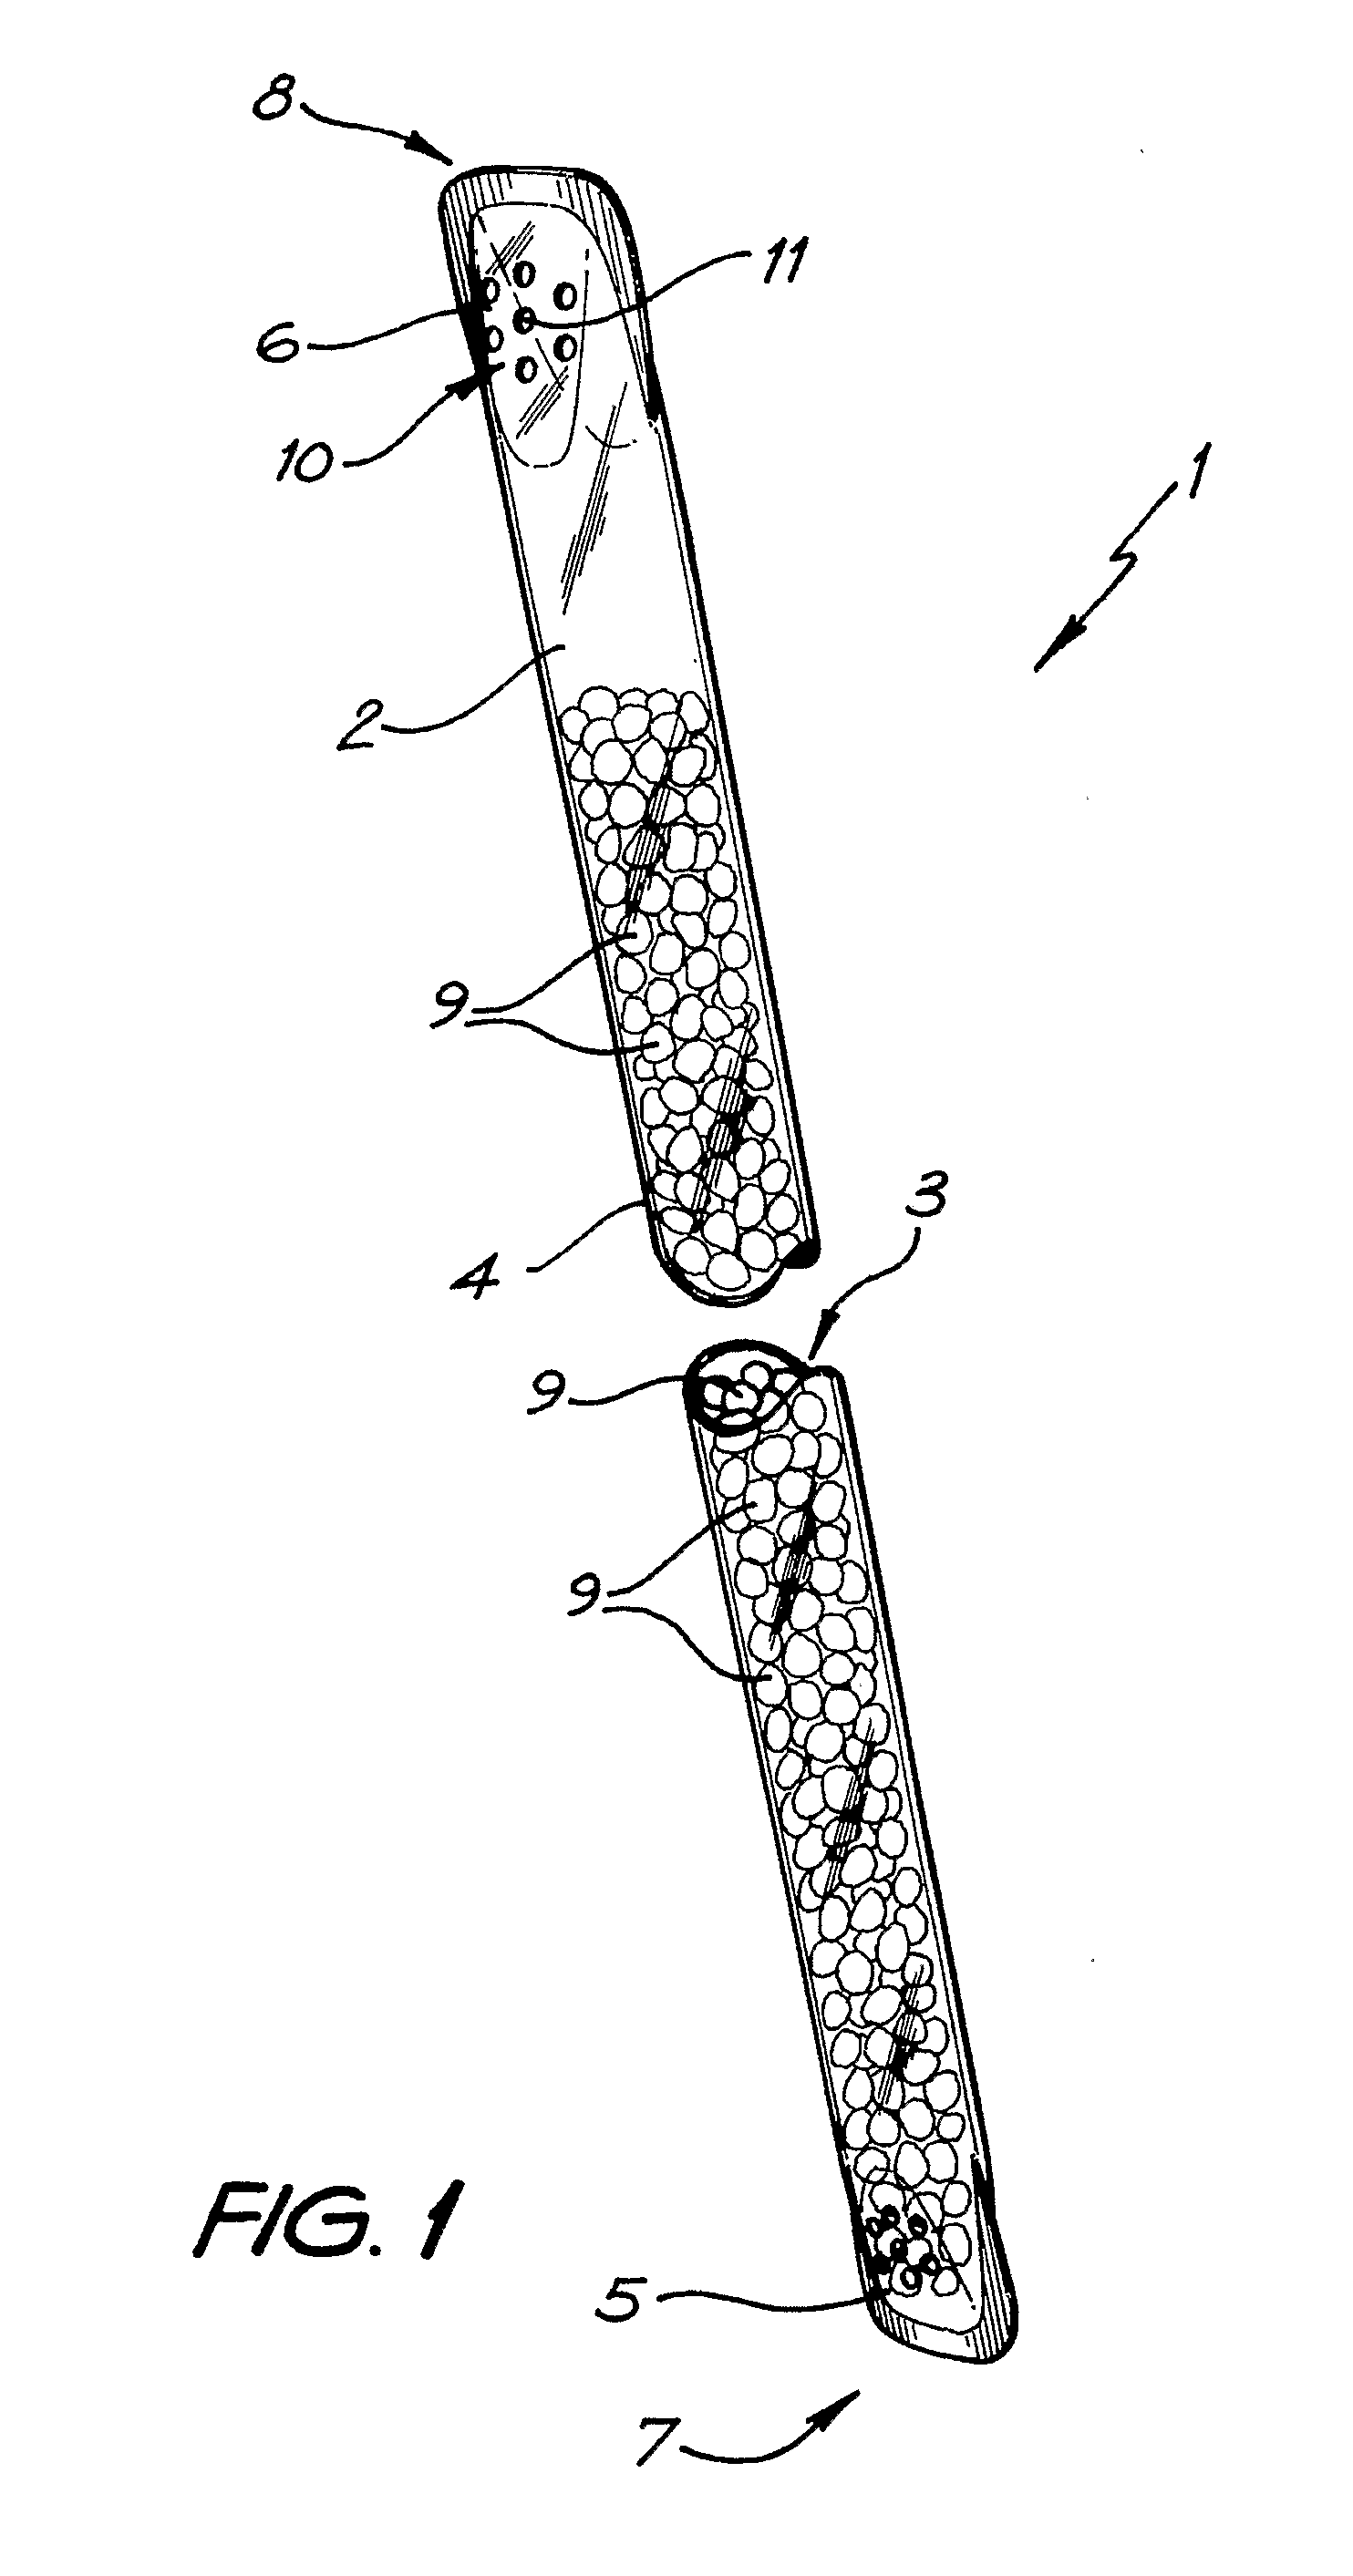 Drinking straw with integral filters